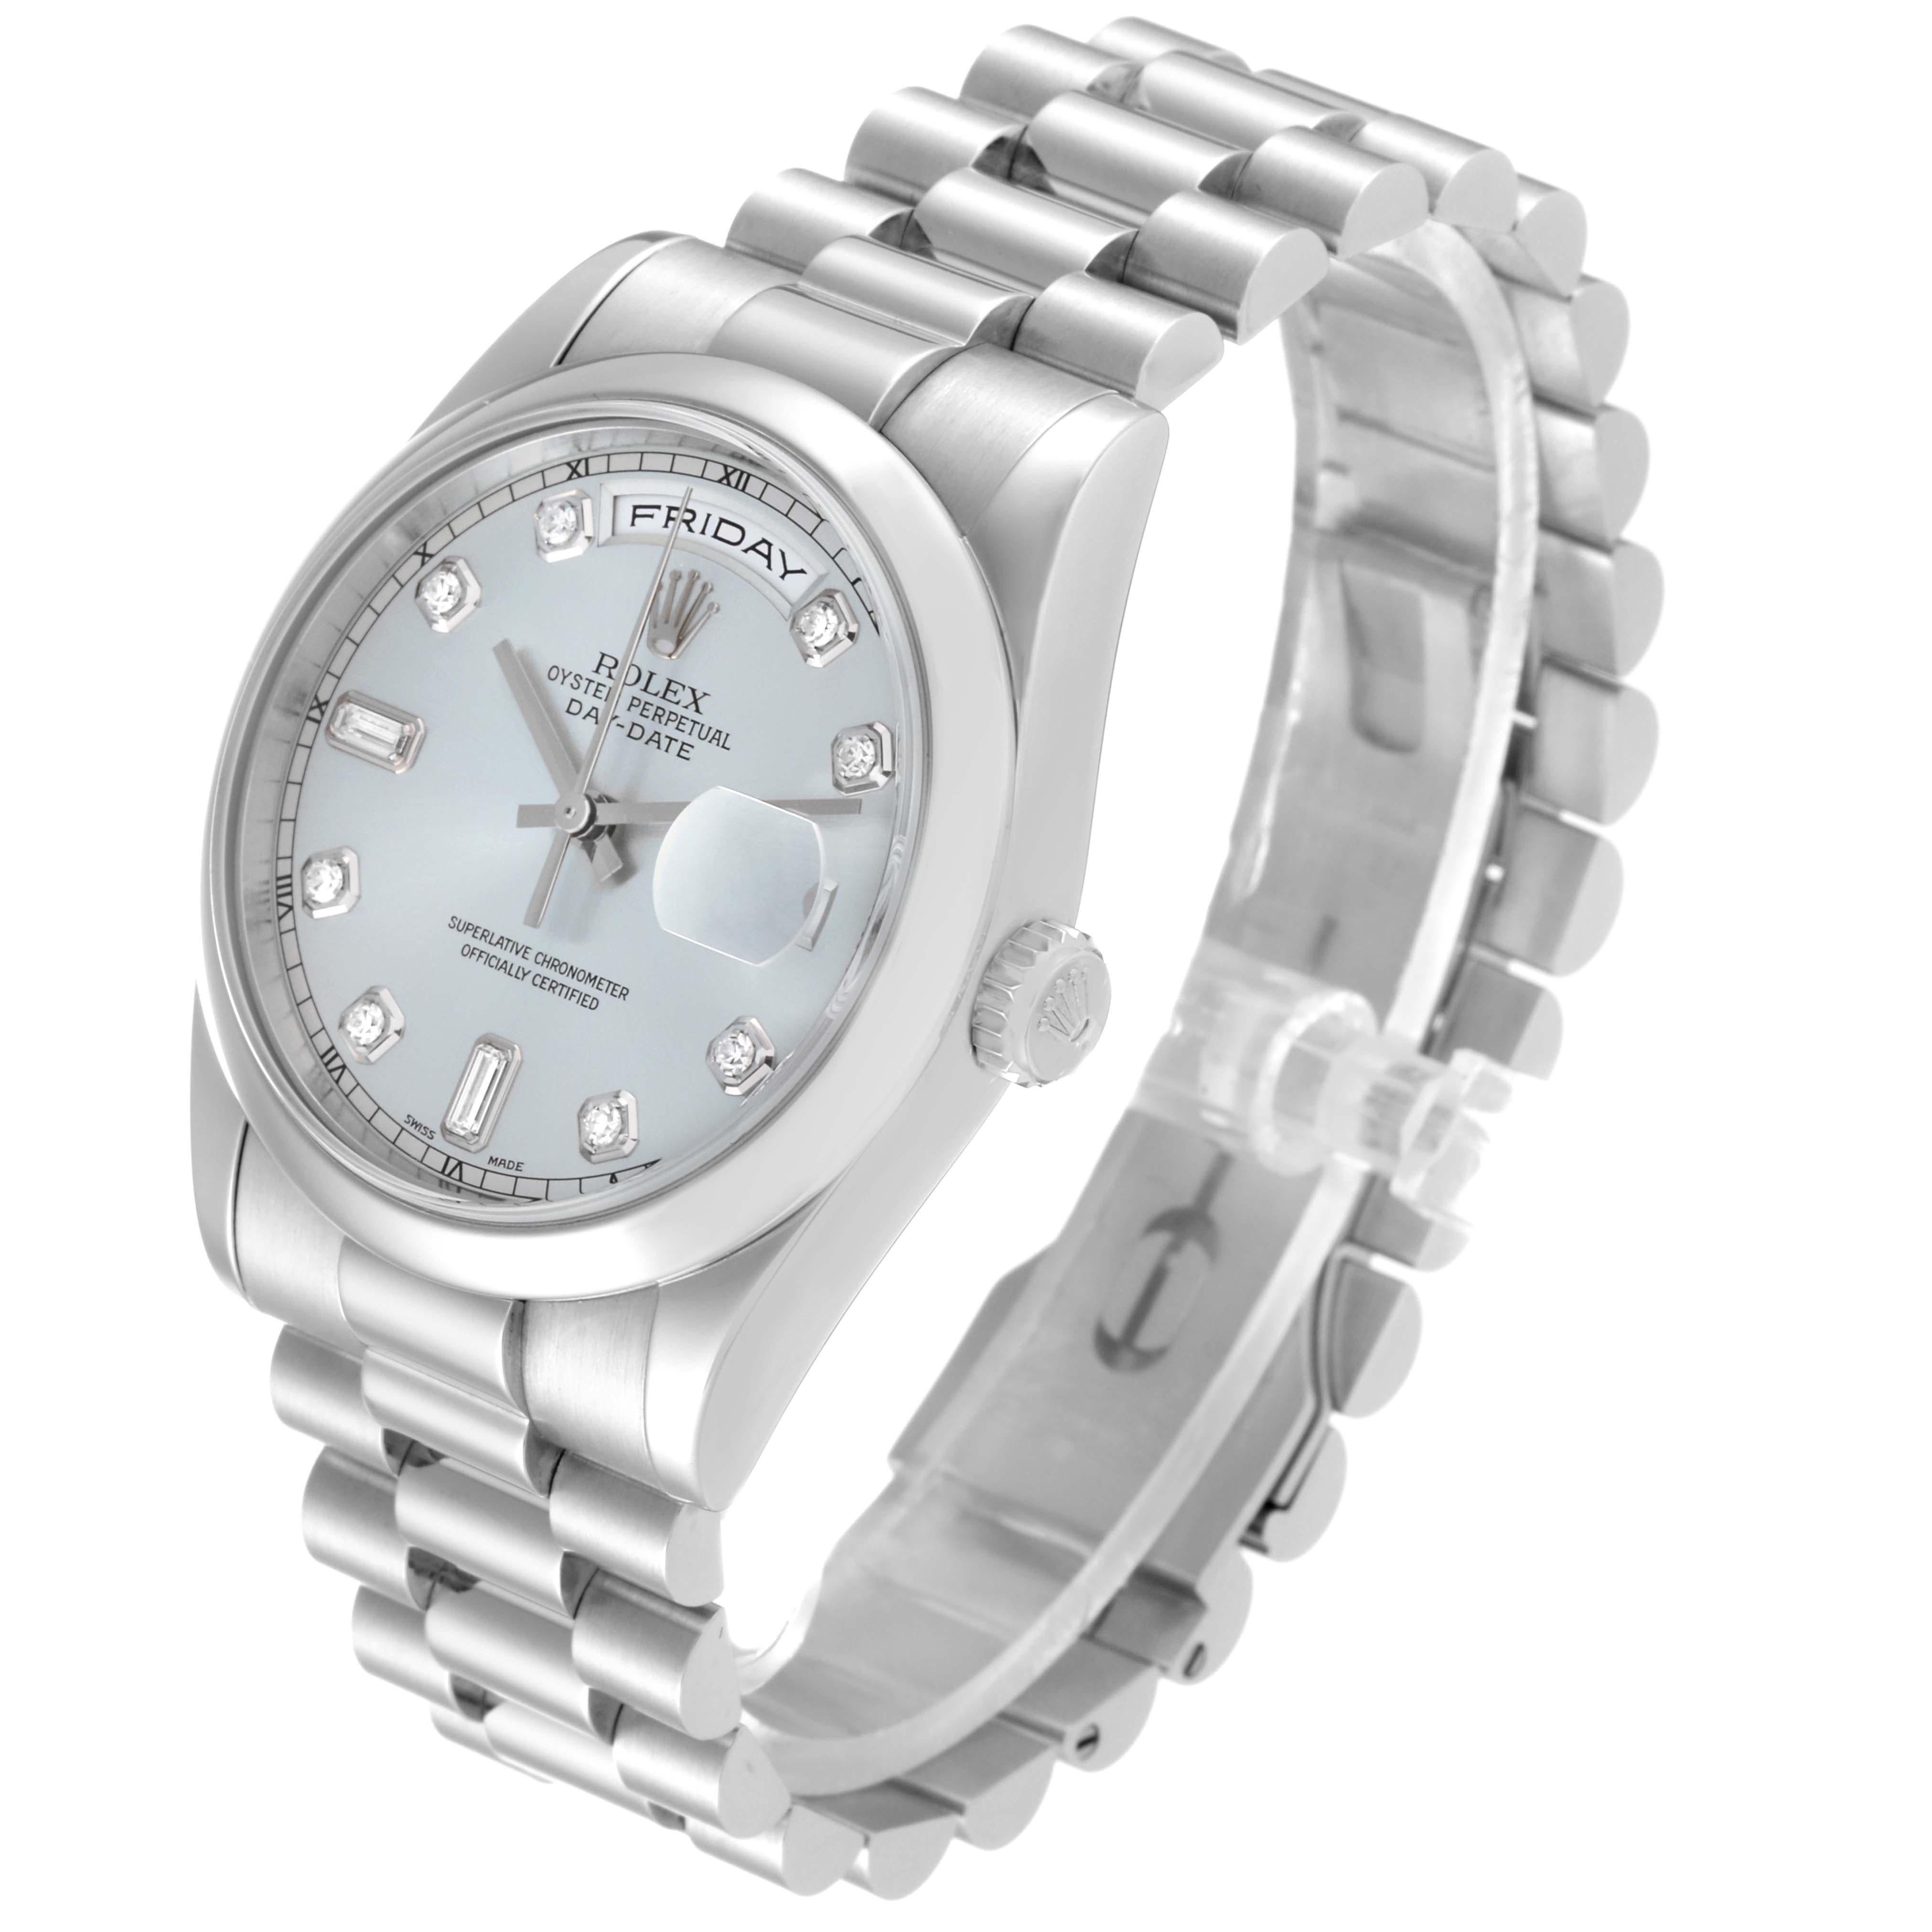 Men's Rolex Day-Date President Diamond Dial Platinum Mens Watch 118206 Box Papers For Sale